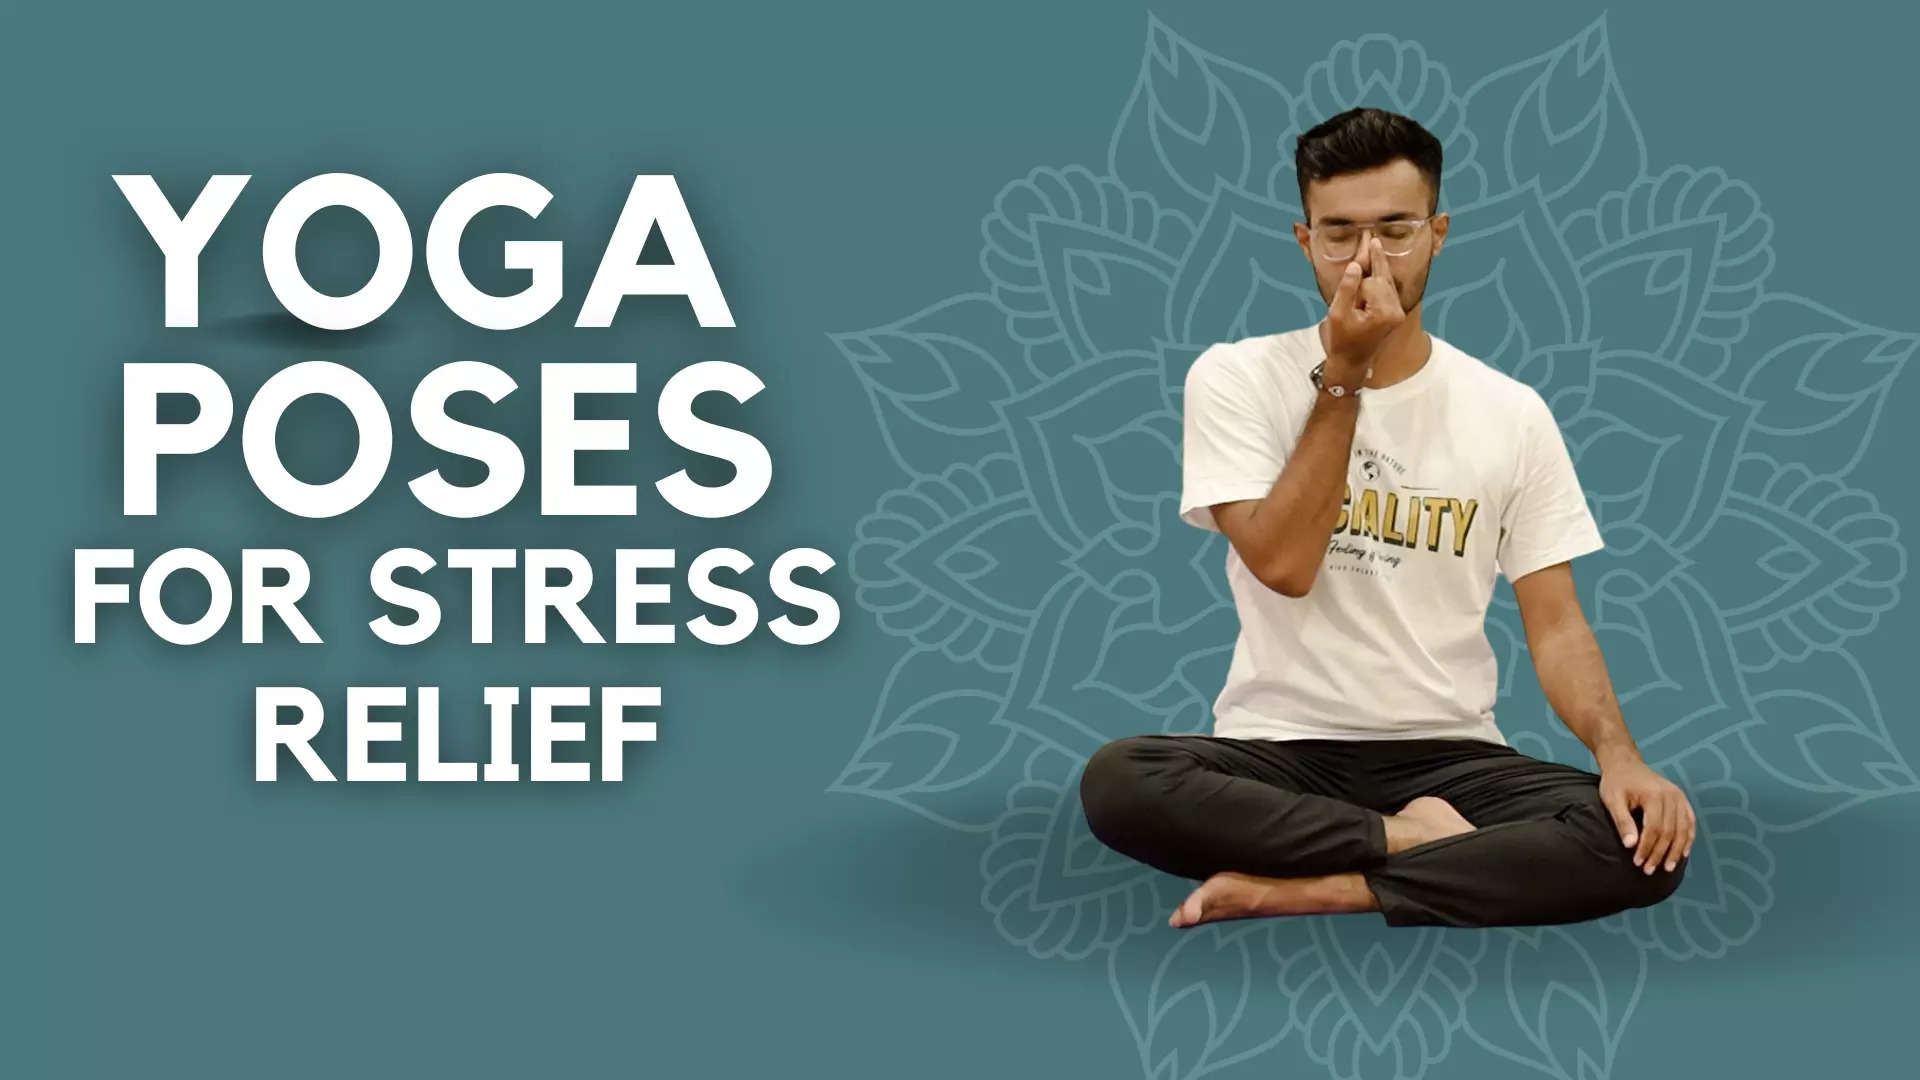 Have You Tried These Yoga Positions for Stress Relief?